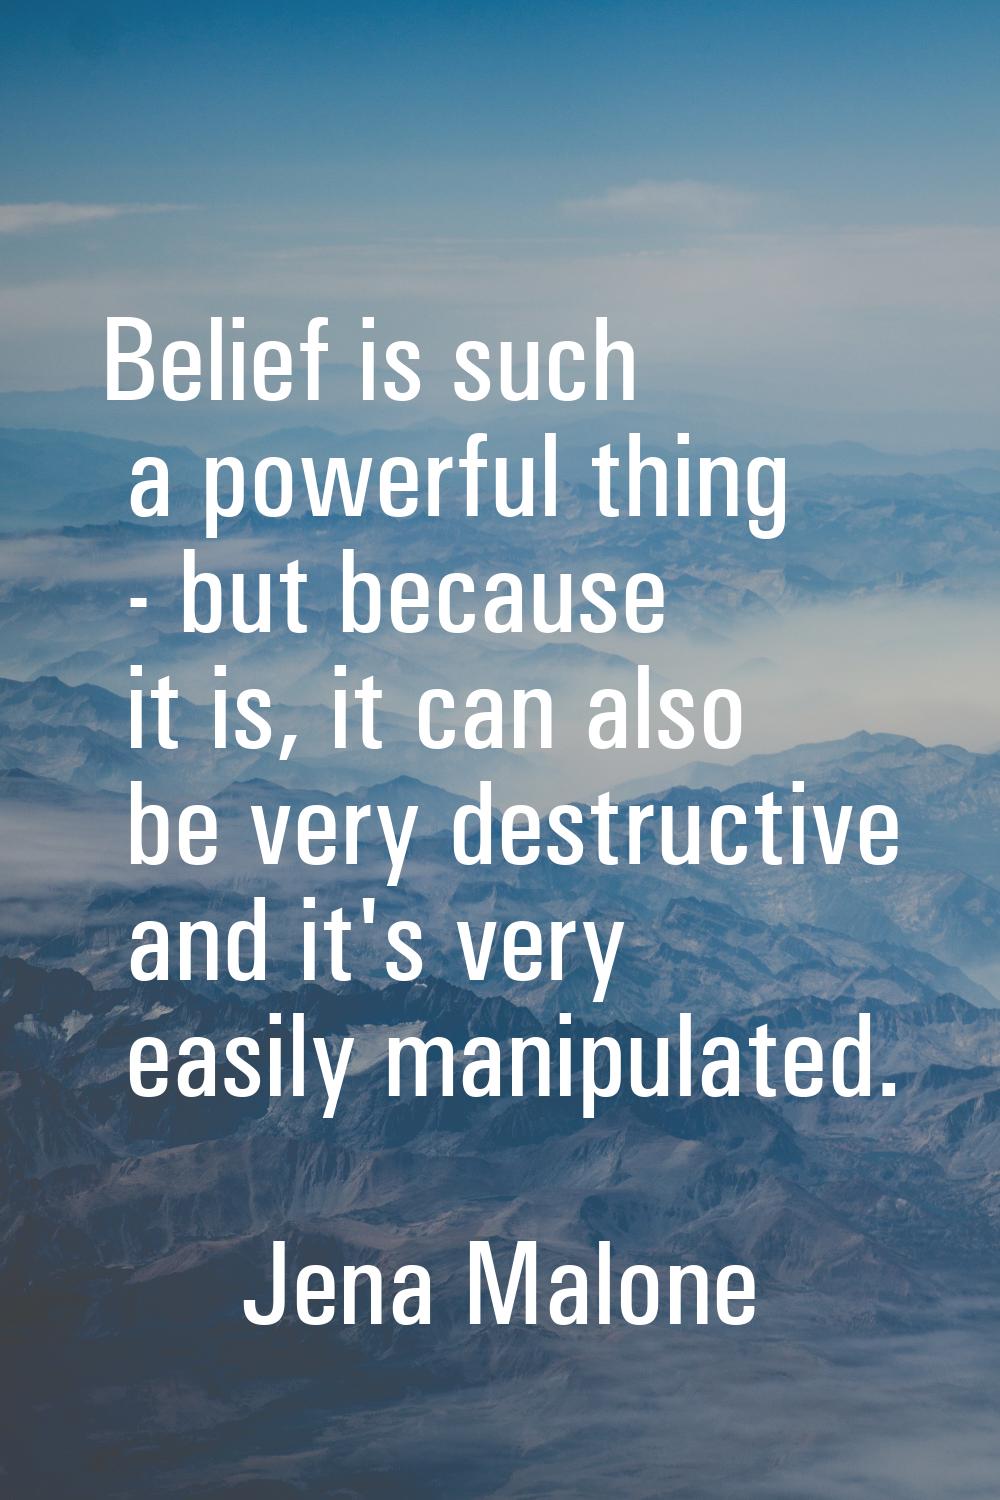 Belief is such a powerful thing - but because it is, it can also be very destructive and it's very 